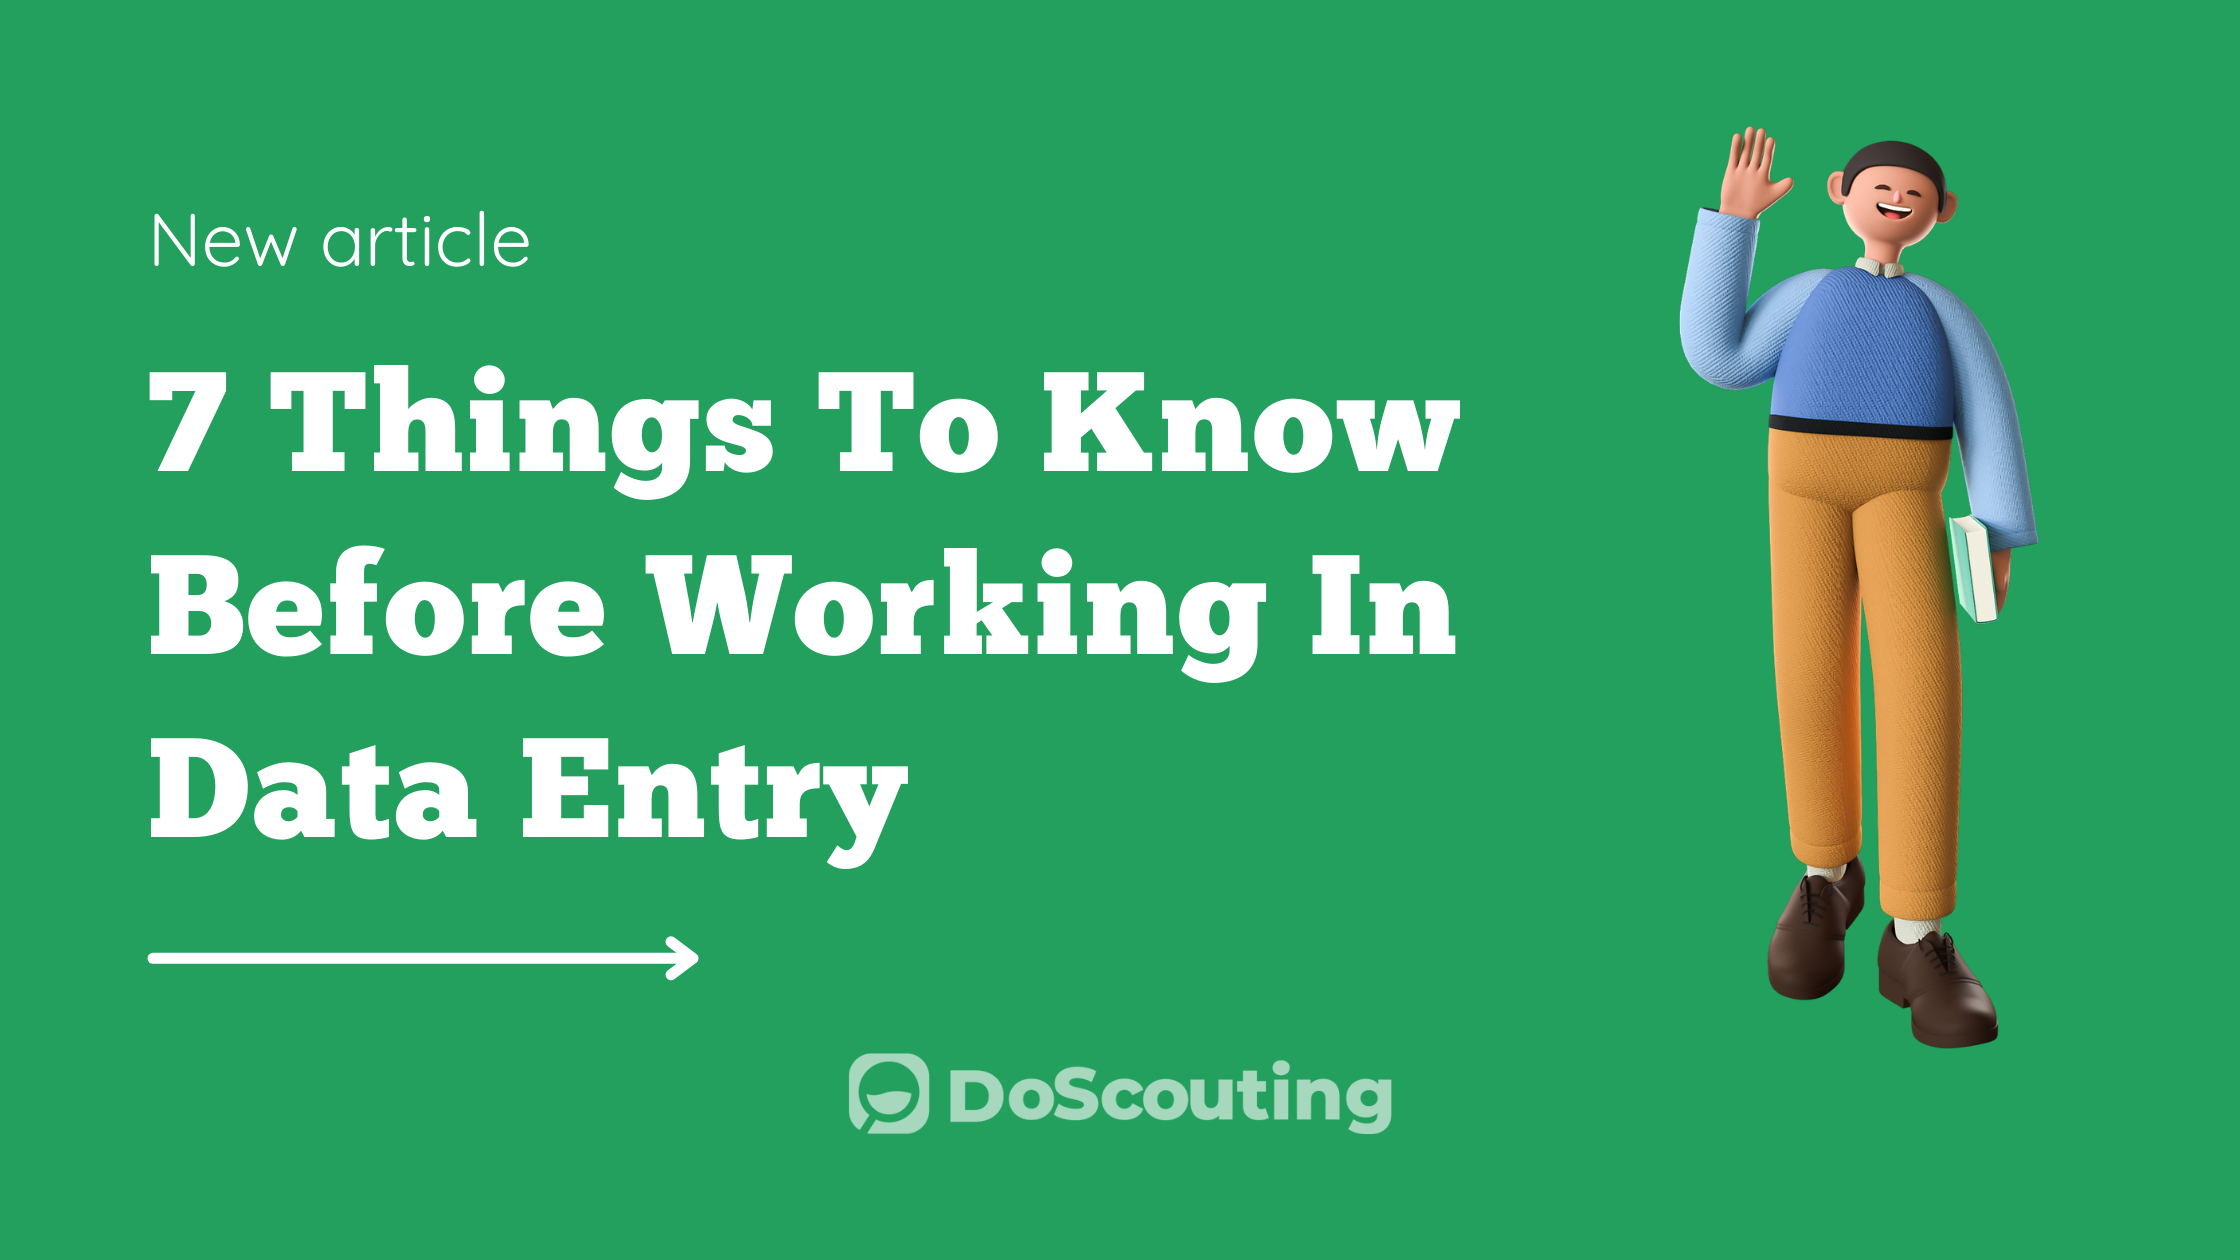 7 Things To Know Before Working In Data Entry